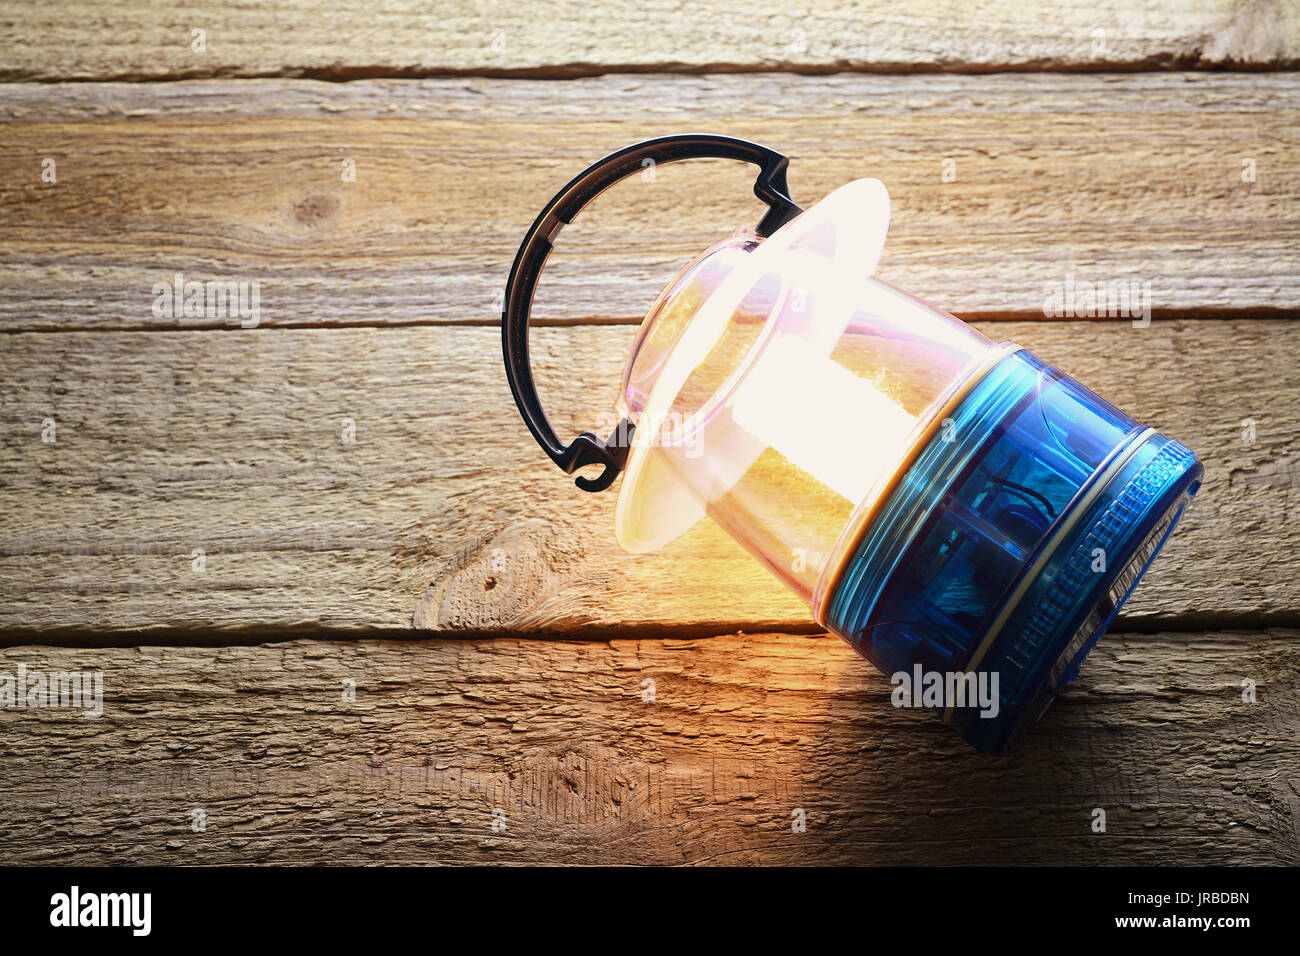 Camping Lantern on Wooden Background Stock Photo